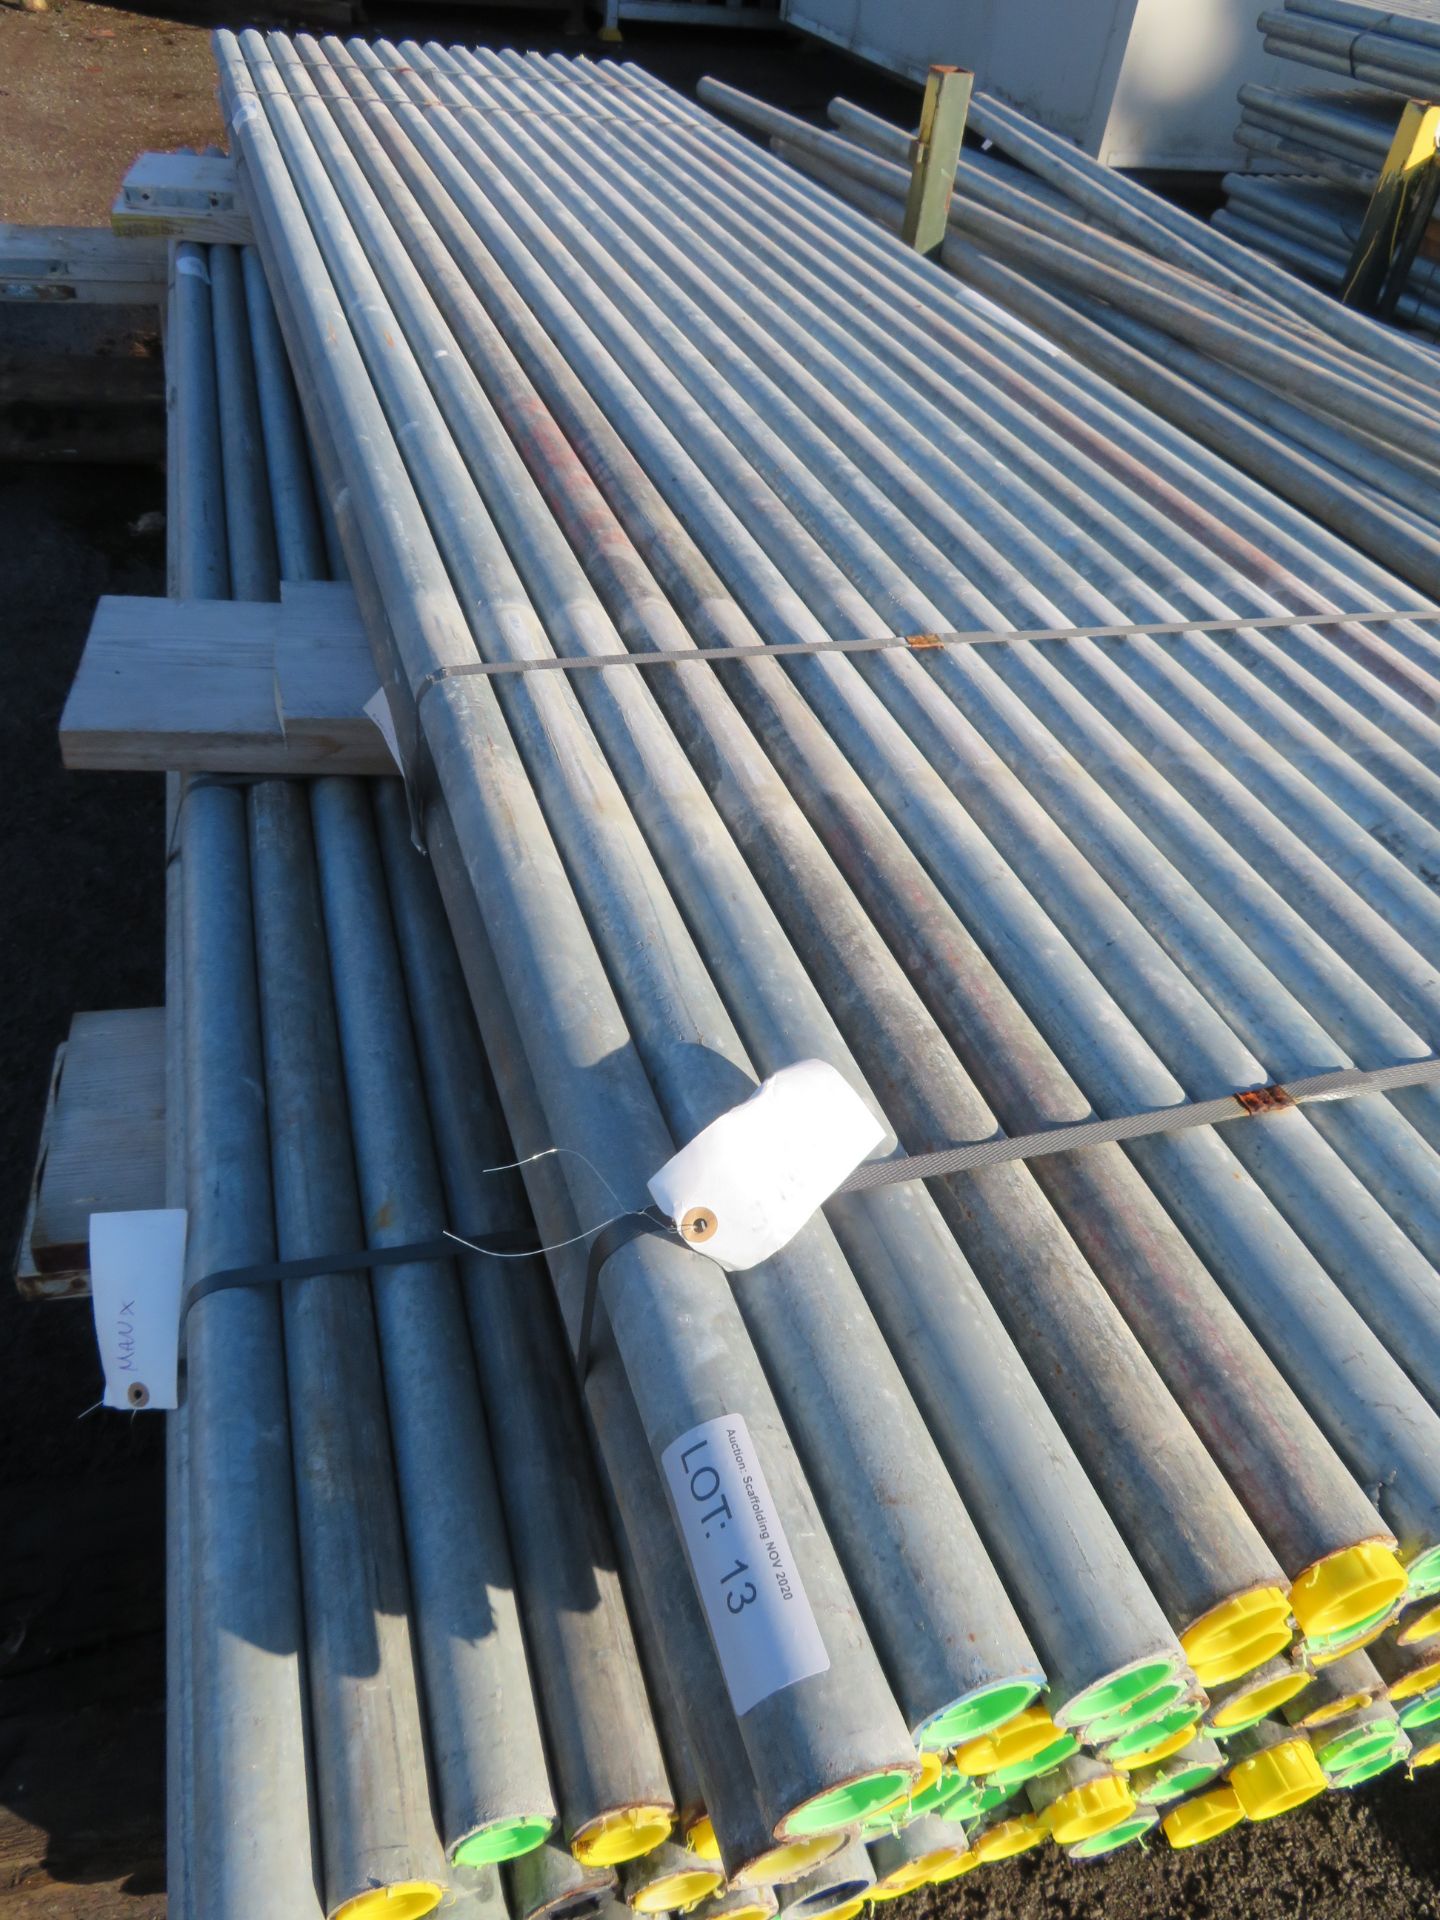 150x 10ft Galvanised Steel Scaffolding Poles 48mm Diameter x 4mm Thick. - Image 4 of 4